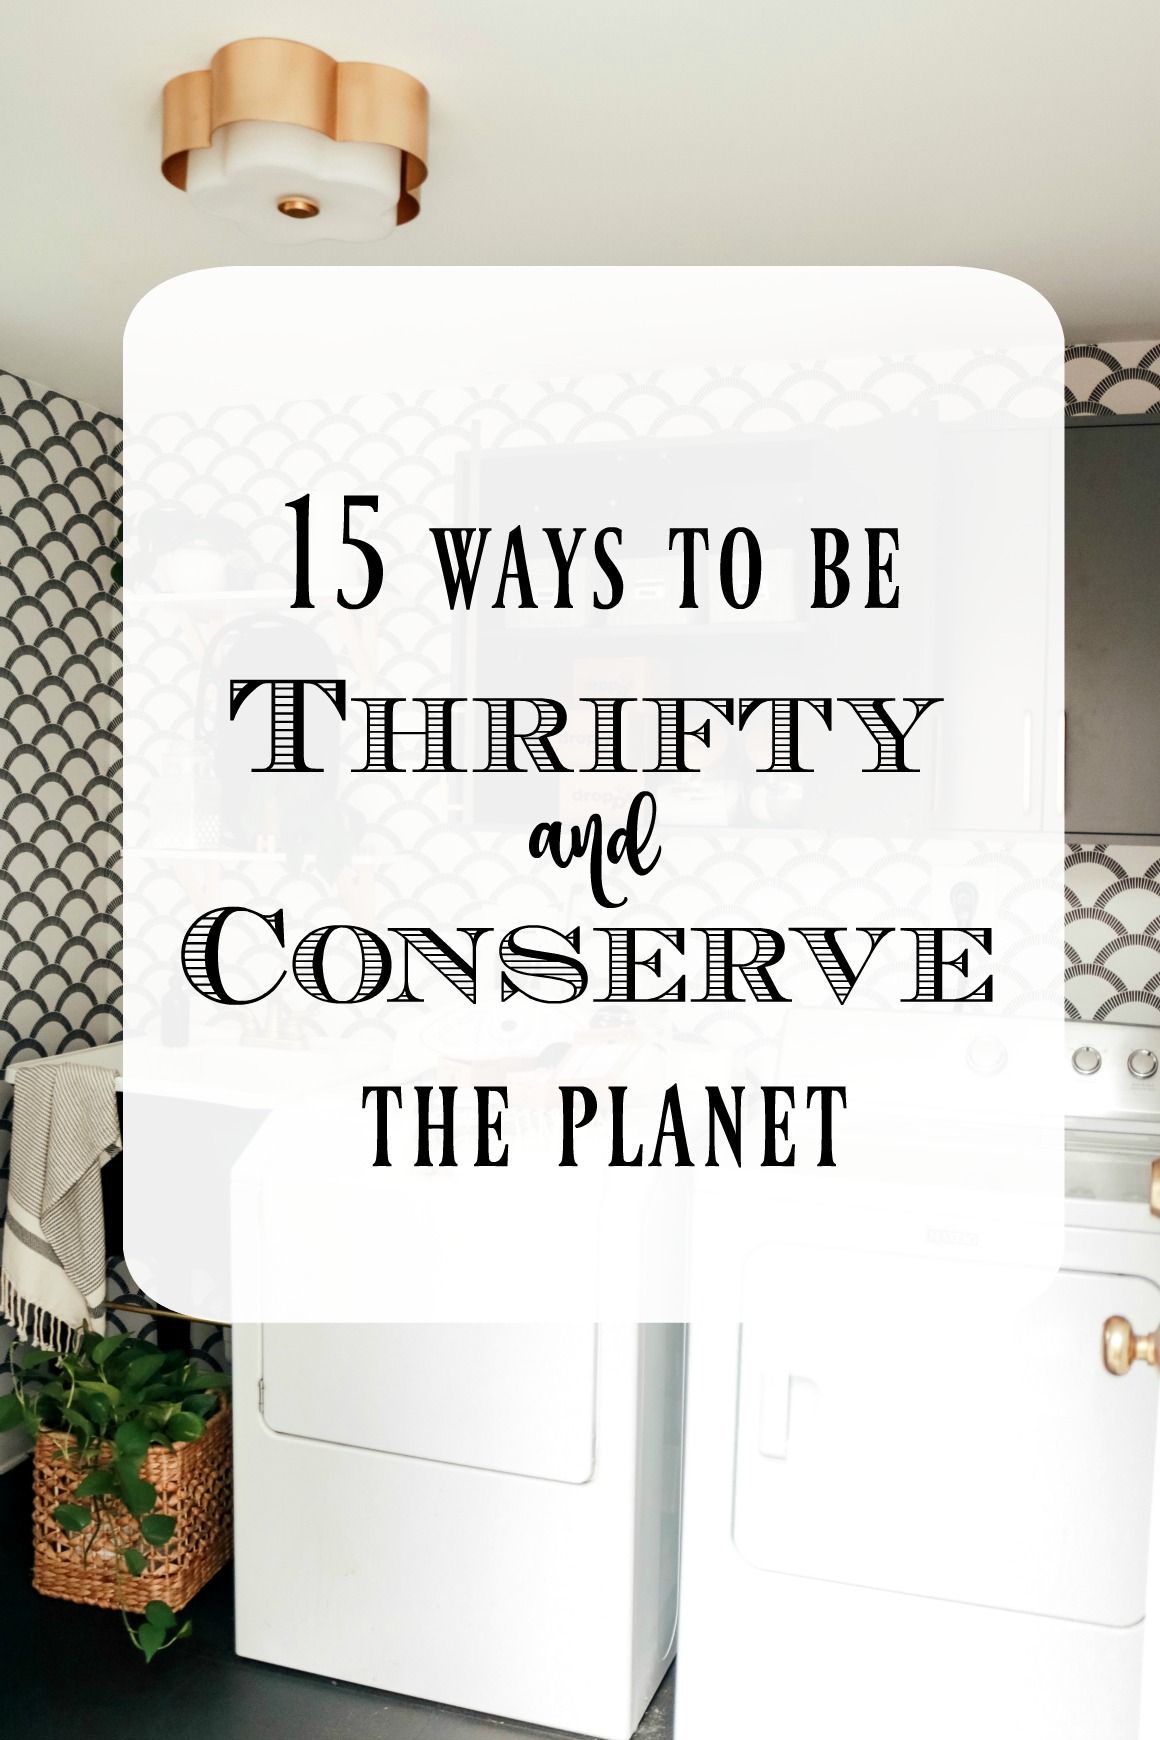 15 Ways to Be Thrifty and Conserve the Planet with Printable!